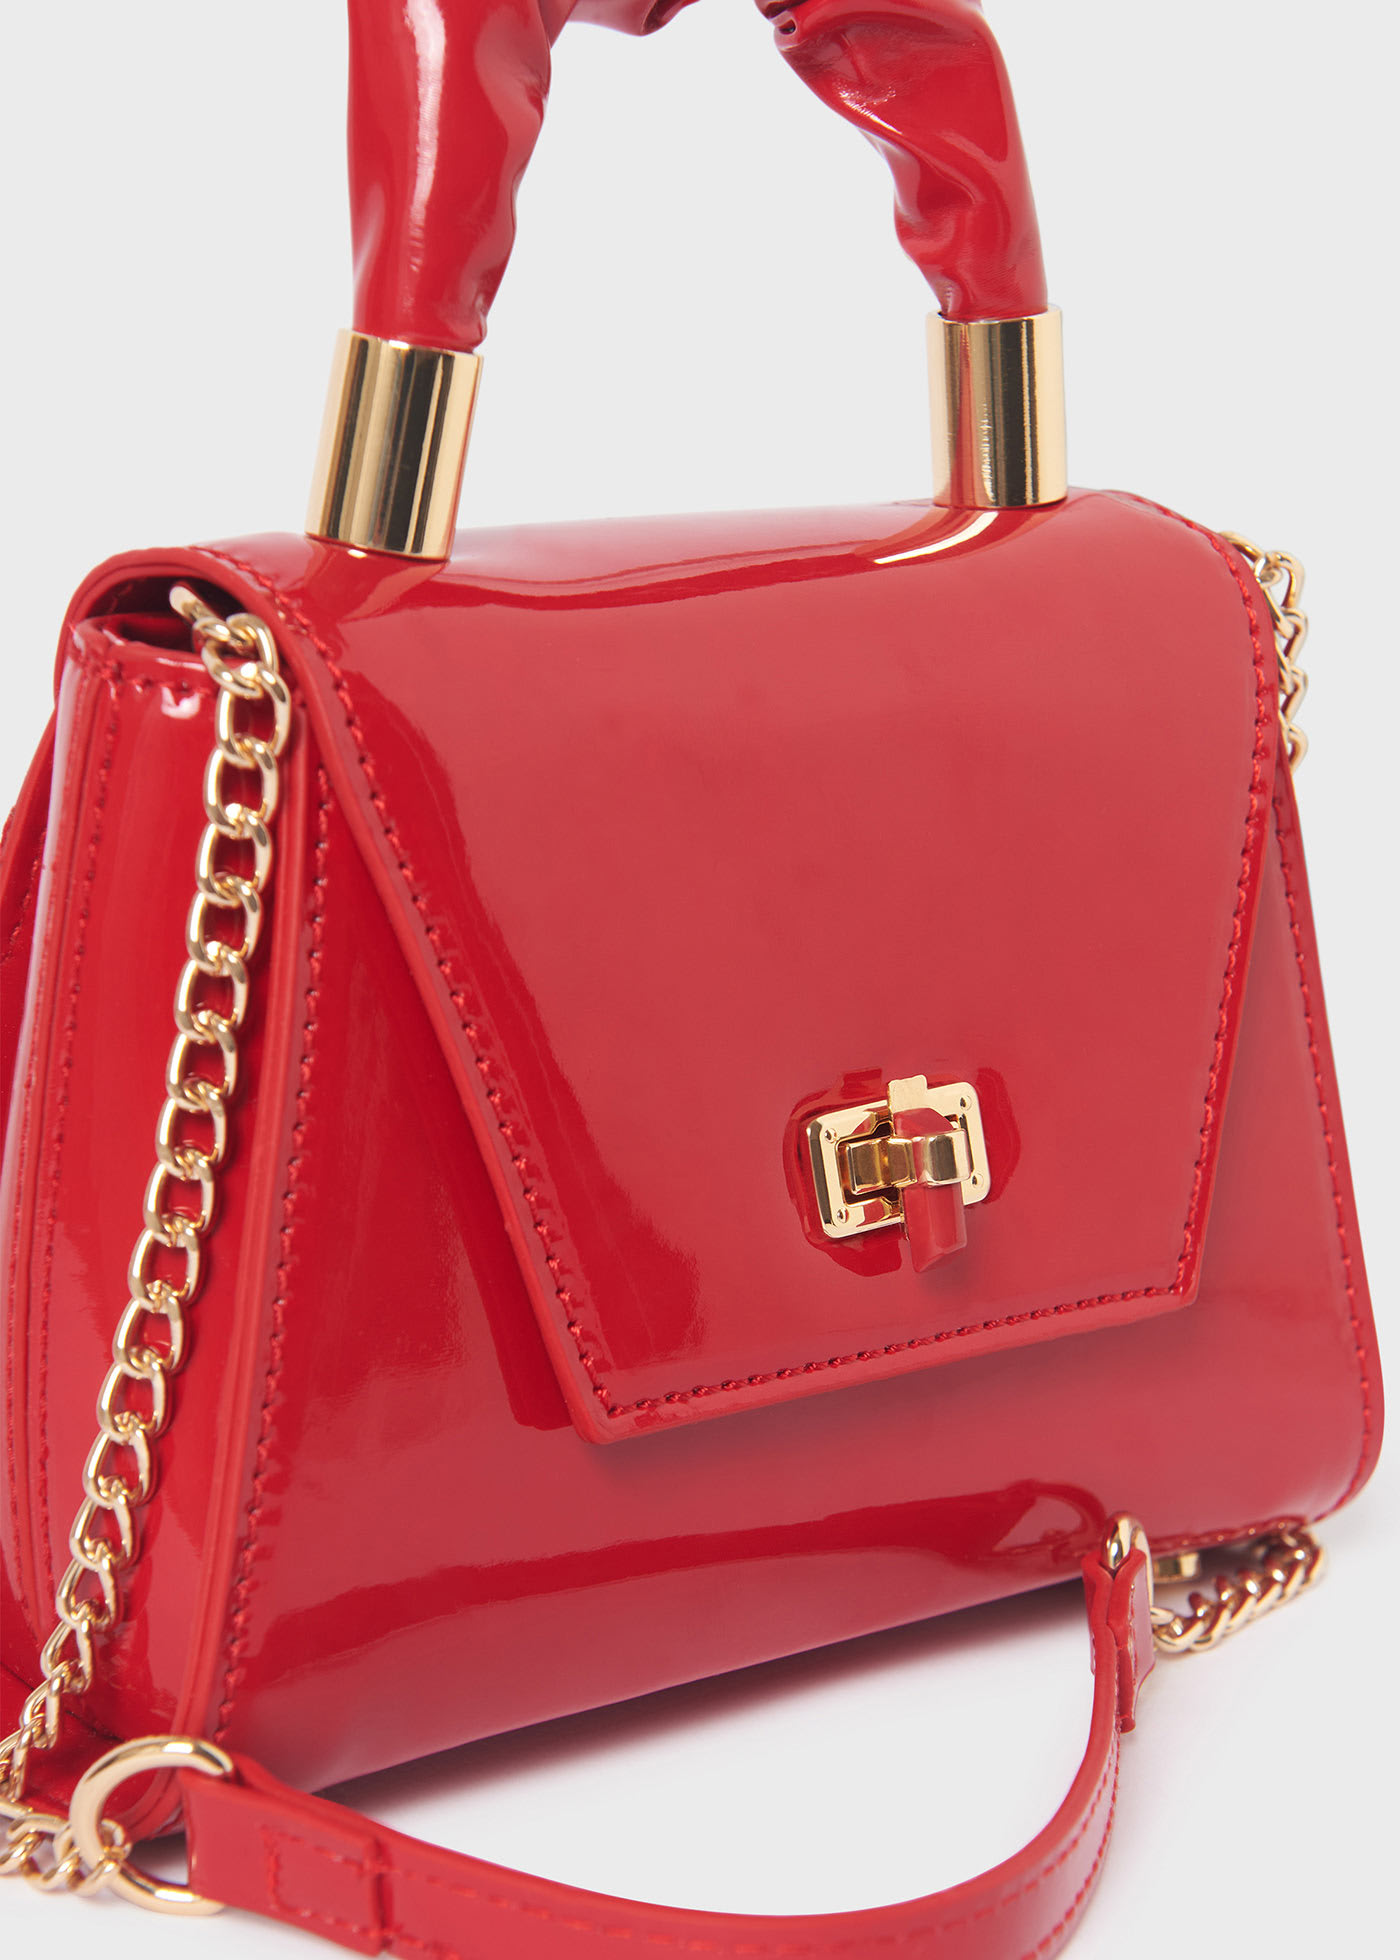 Girl patent leather bag